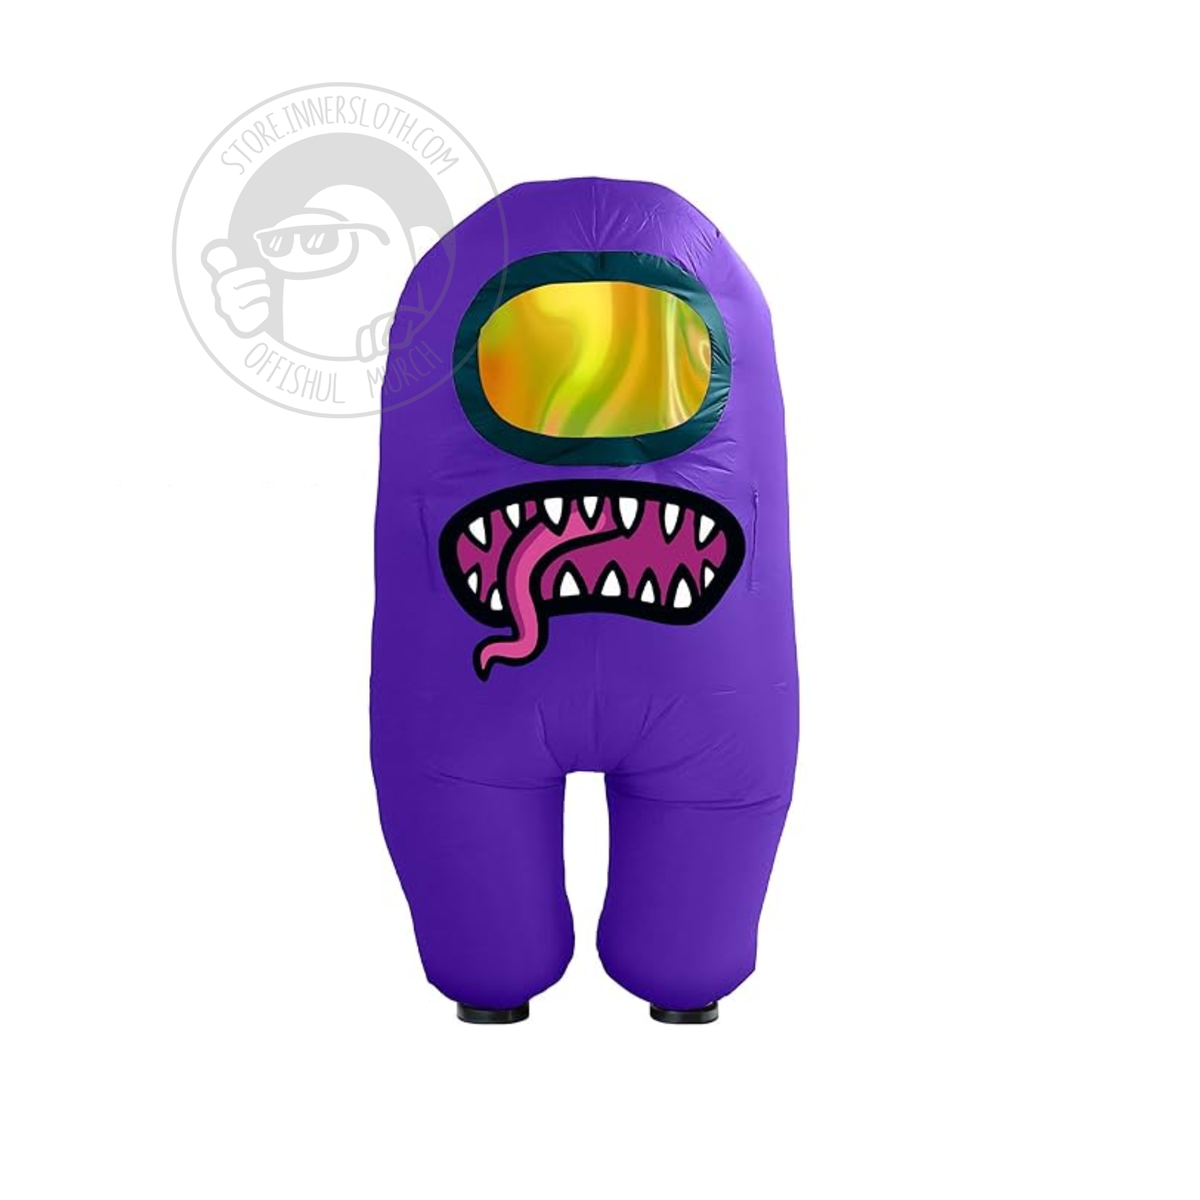 Front view of the Purple inflatable Impostor costume, there is an open mouth with sharp teeth and pink tongue sticking out of the belly of the costume. 